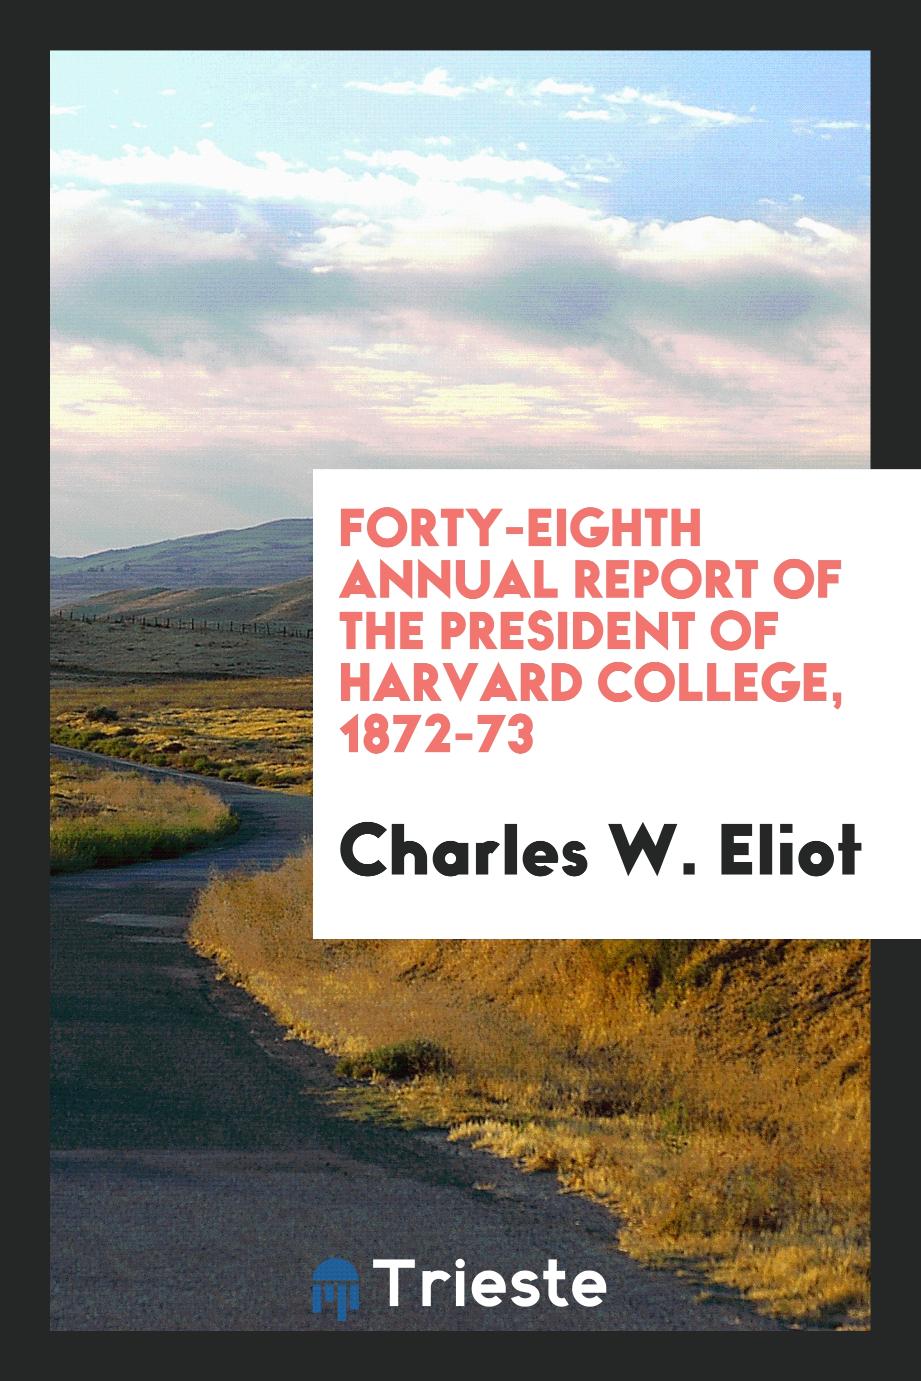 Forty-Eighth Annual Report of the President of Harvard College, 1872-73